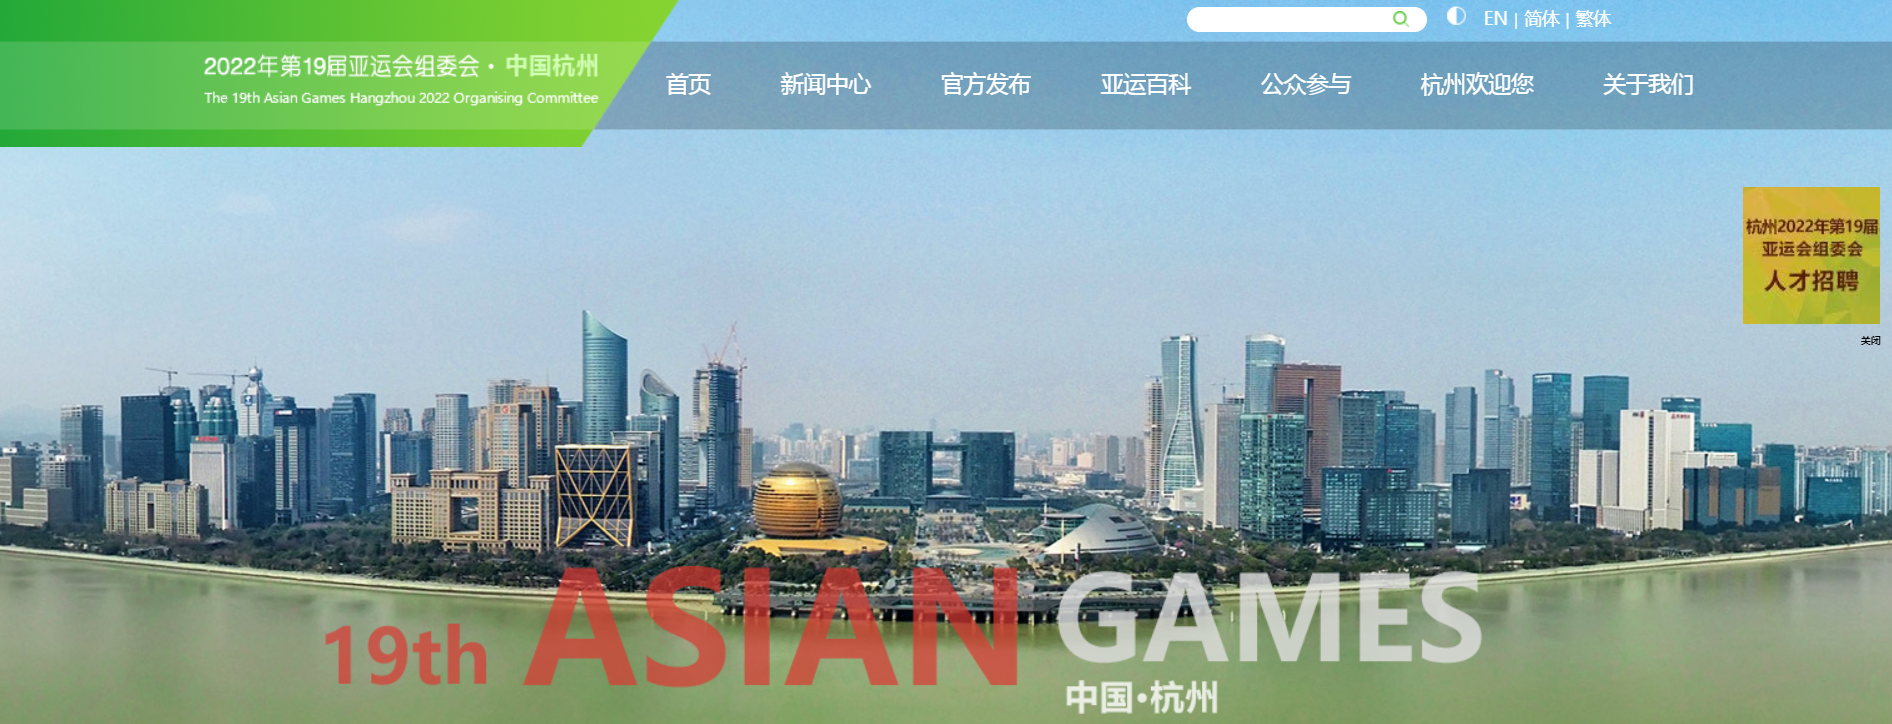 The official website for the Hangzhou 2022 Asian Games is up and running ©Hangzhou 2022